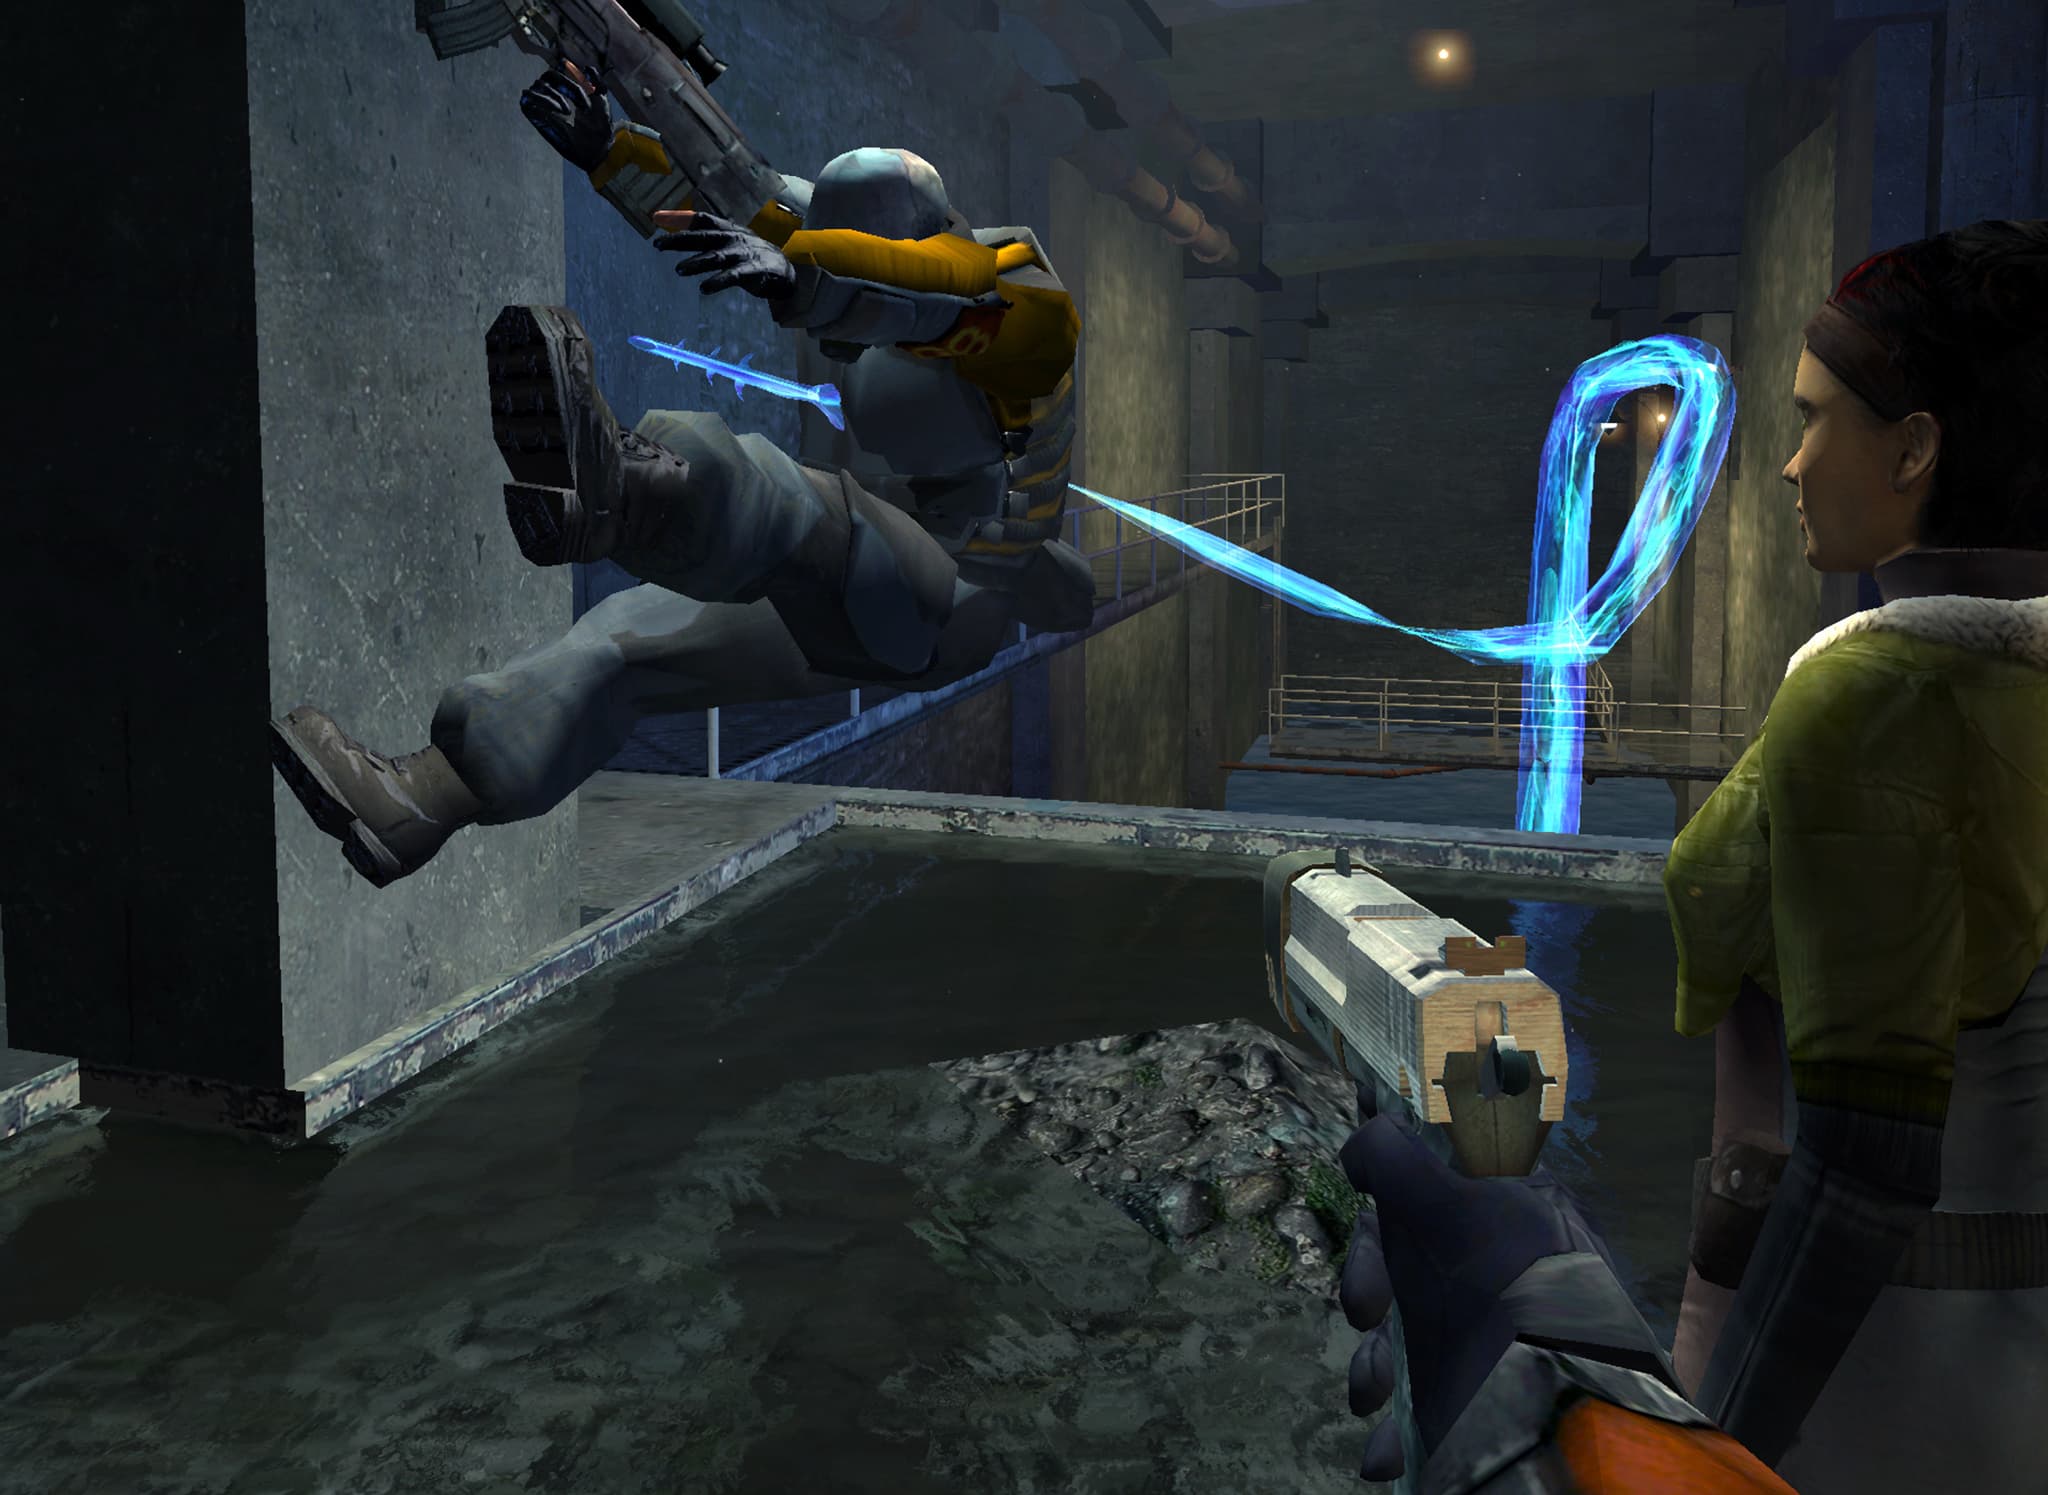 In the sewers, a glowing blue tentacle spears through the chest of an early model of a Combine soldier as the player and Alyx Vance, the latter wearing a blue and purple bodysuit and a green vest, watch.